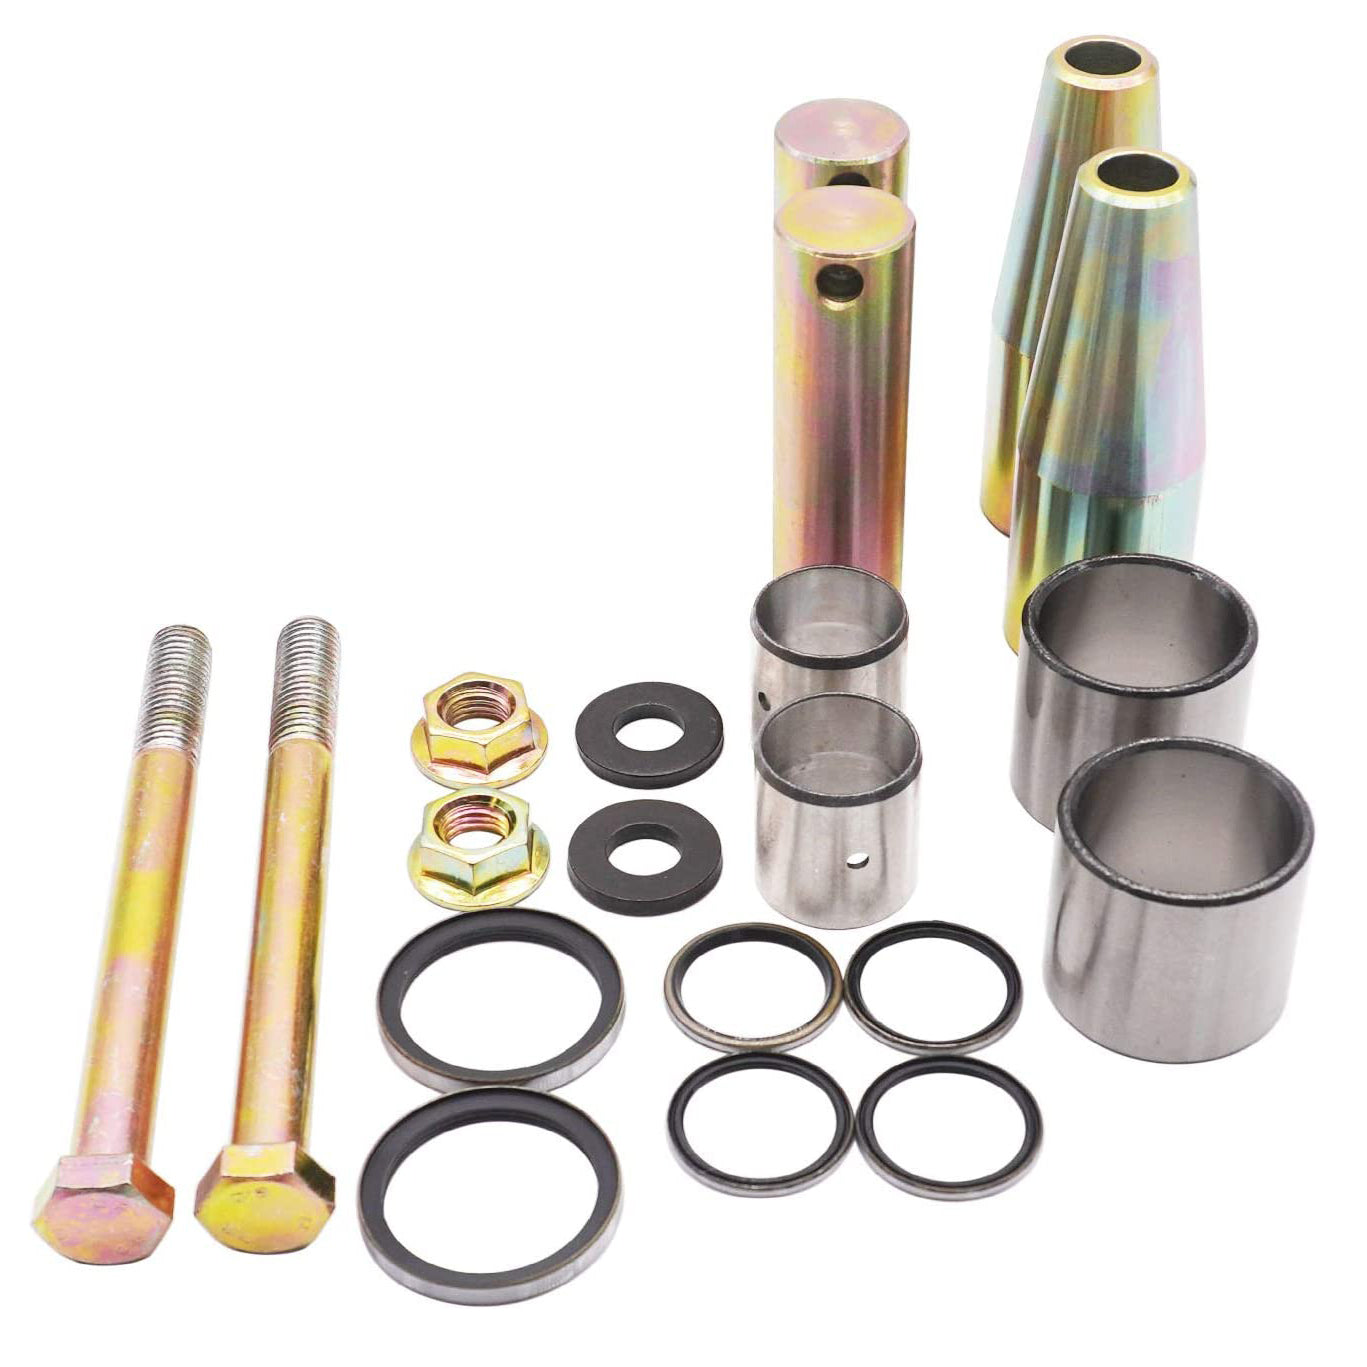 New 6577954 6805453 6729358 7139943 Pin and Bushing Kit Compatible with Bobcat A300 T250 T300 T320 S220 S250 S300 S330